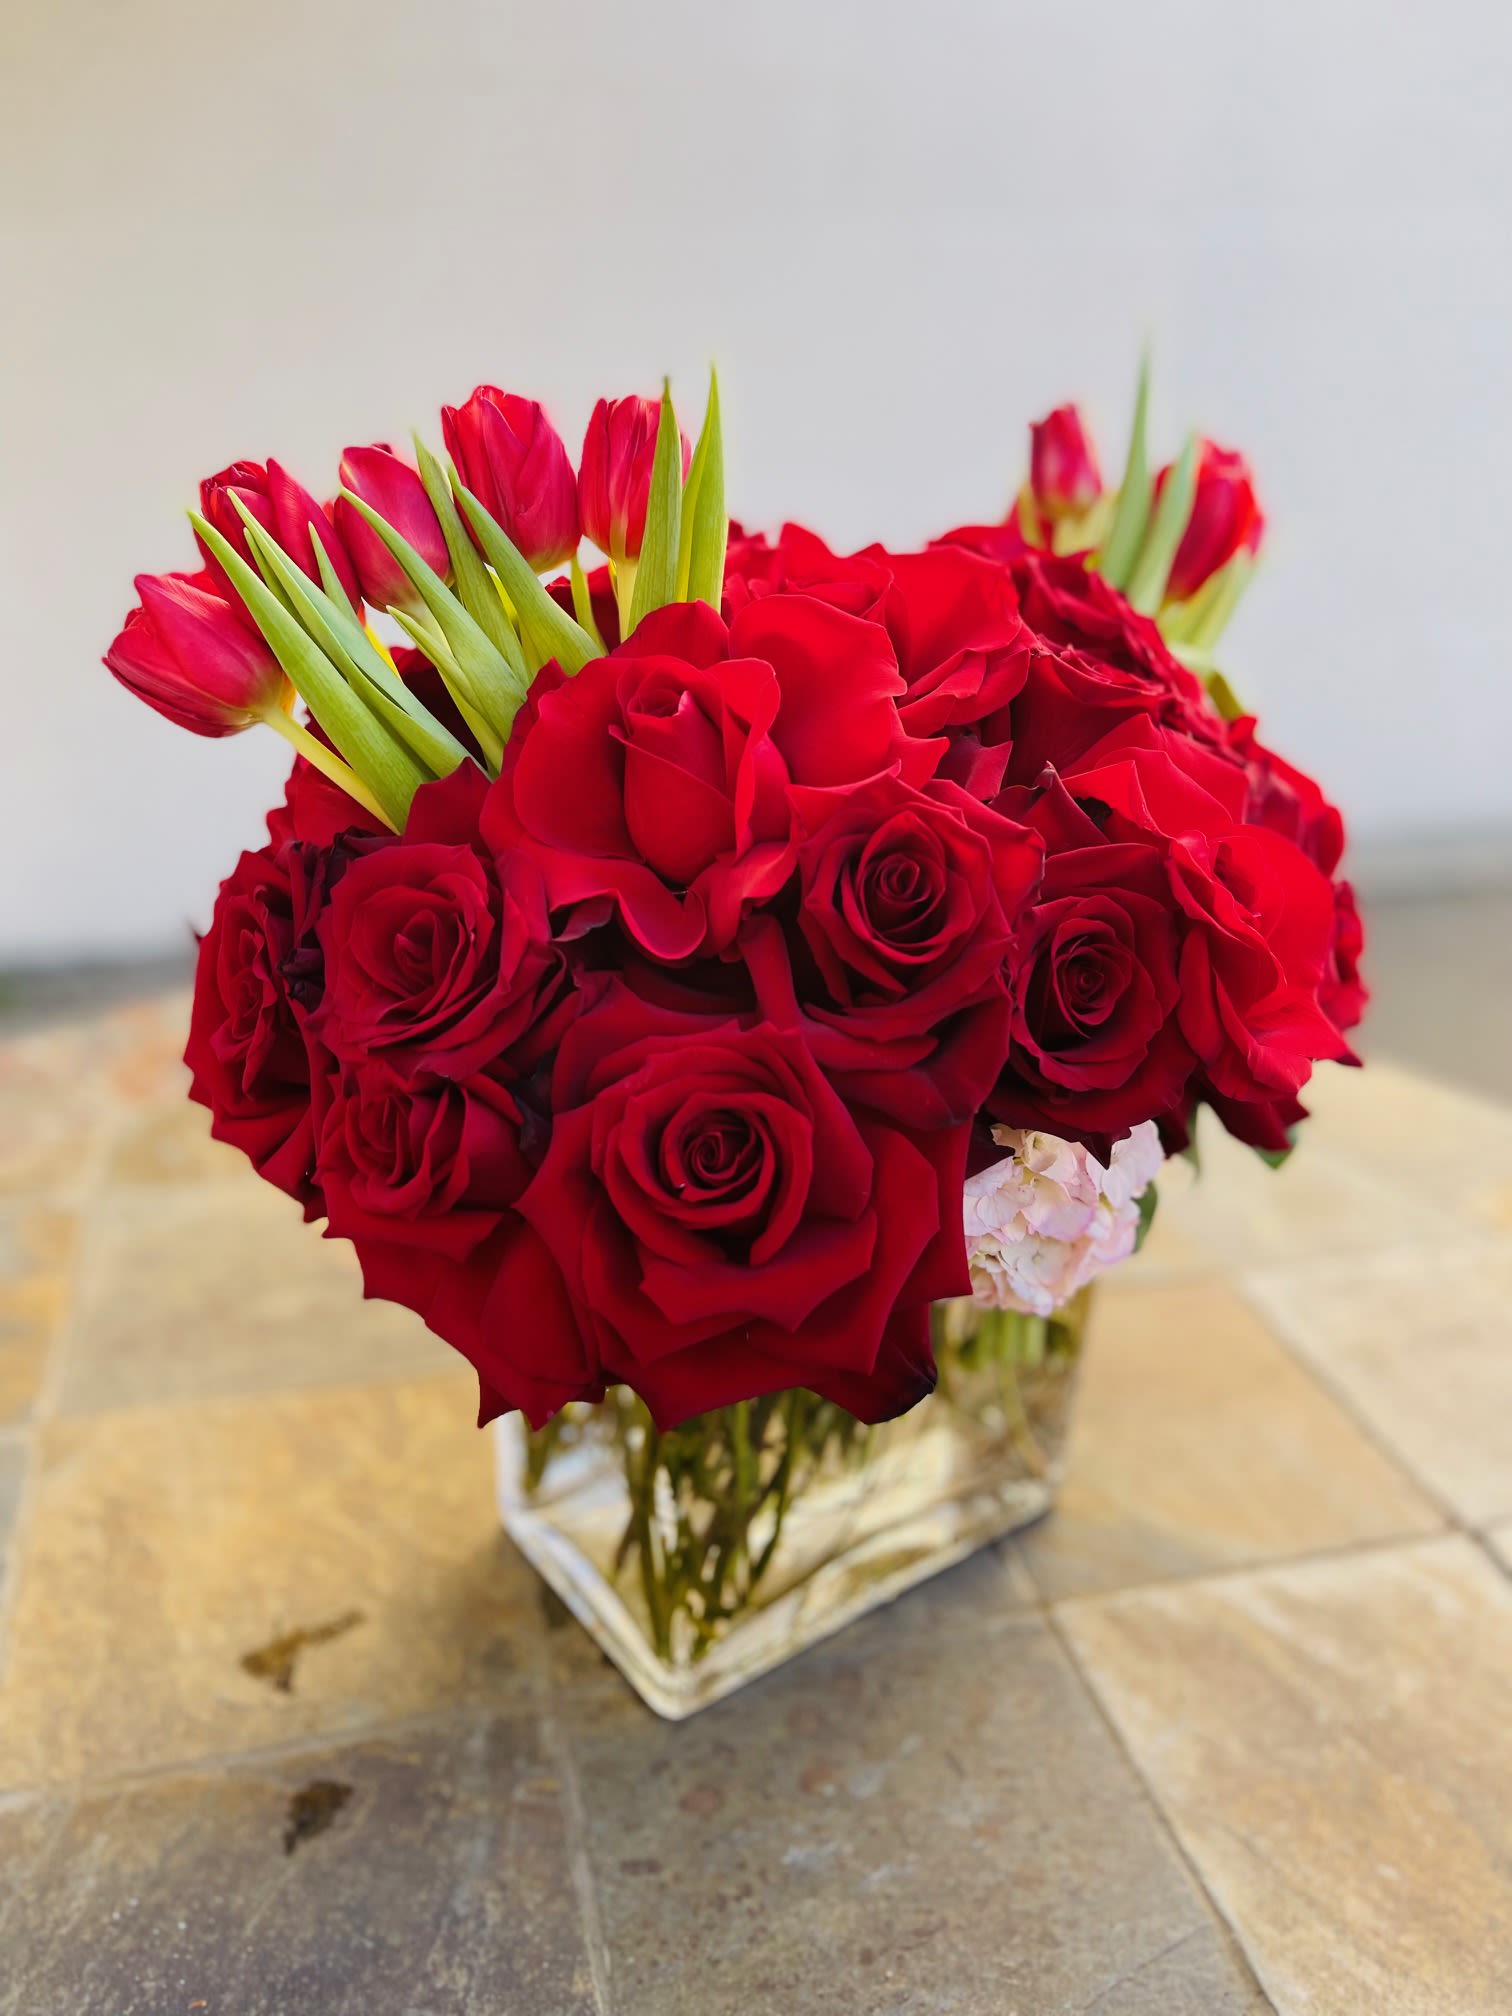 Red pave - Red roses, Pale pink Hydrangeas and touch of red tulips in a 6x6 cylinder vase.